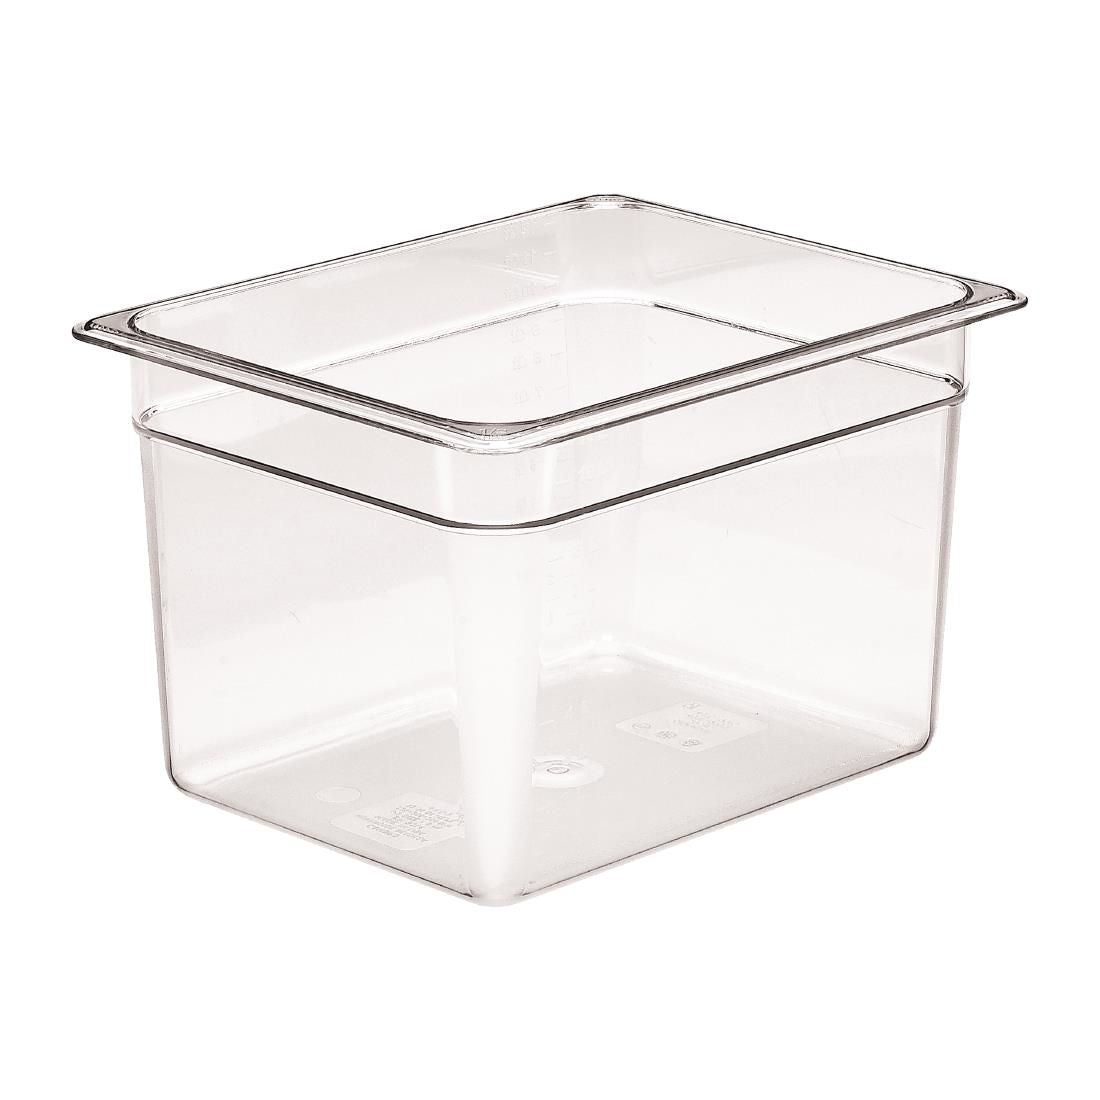 DM746 Cambro Polycarbonate 1/2 Gastronorm Pan 200mm JD Catering Equipment Solutions Ltd